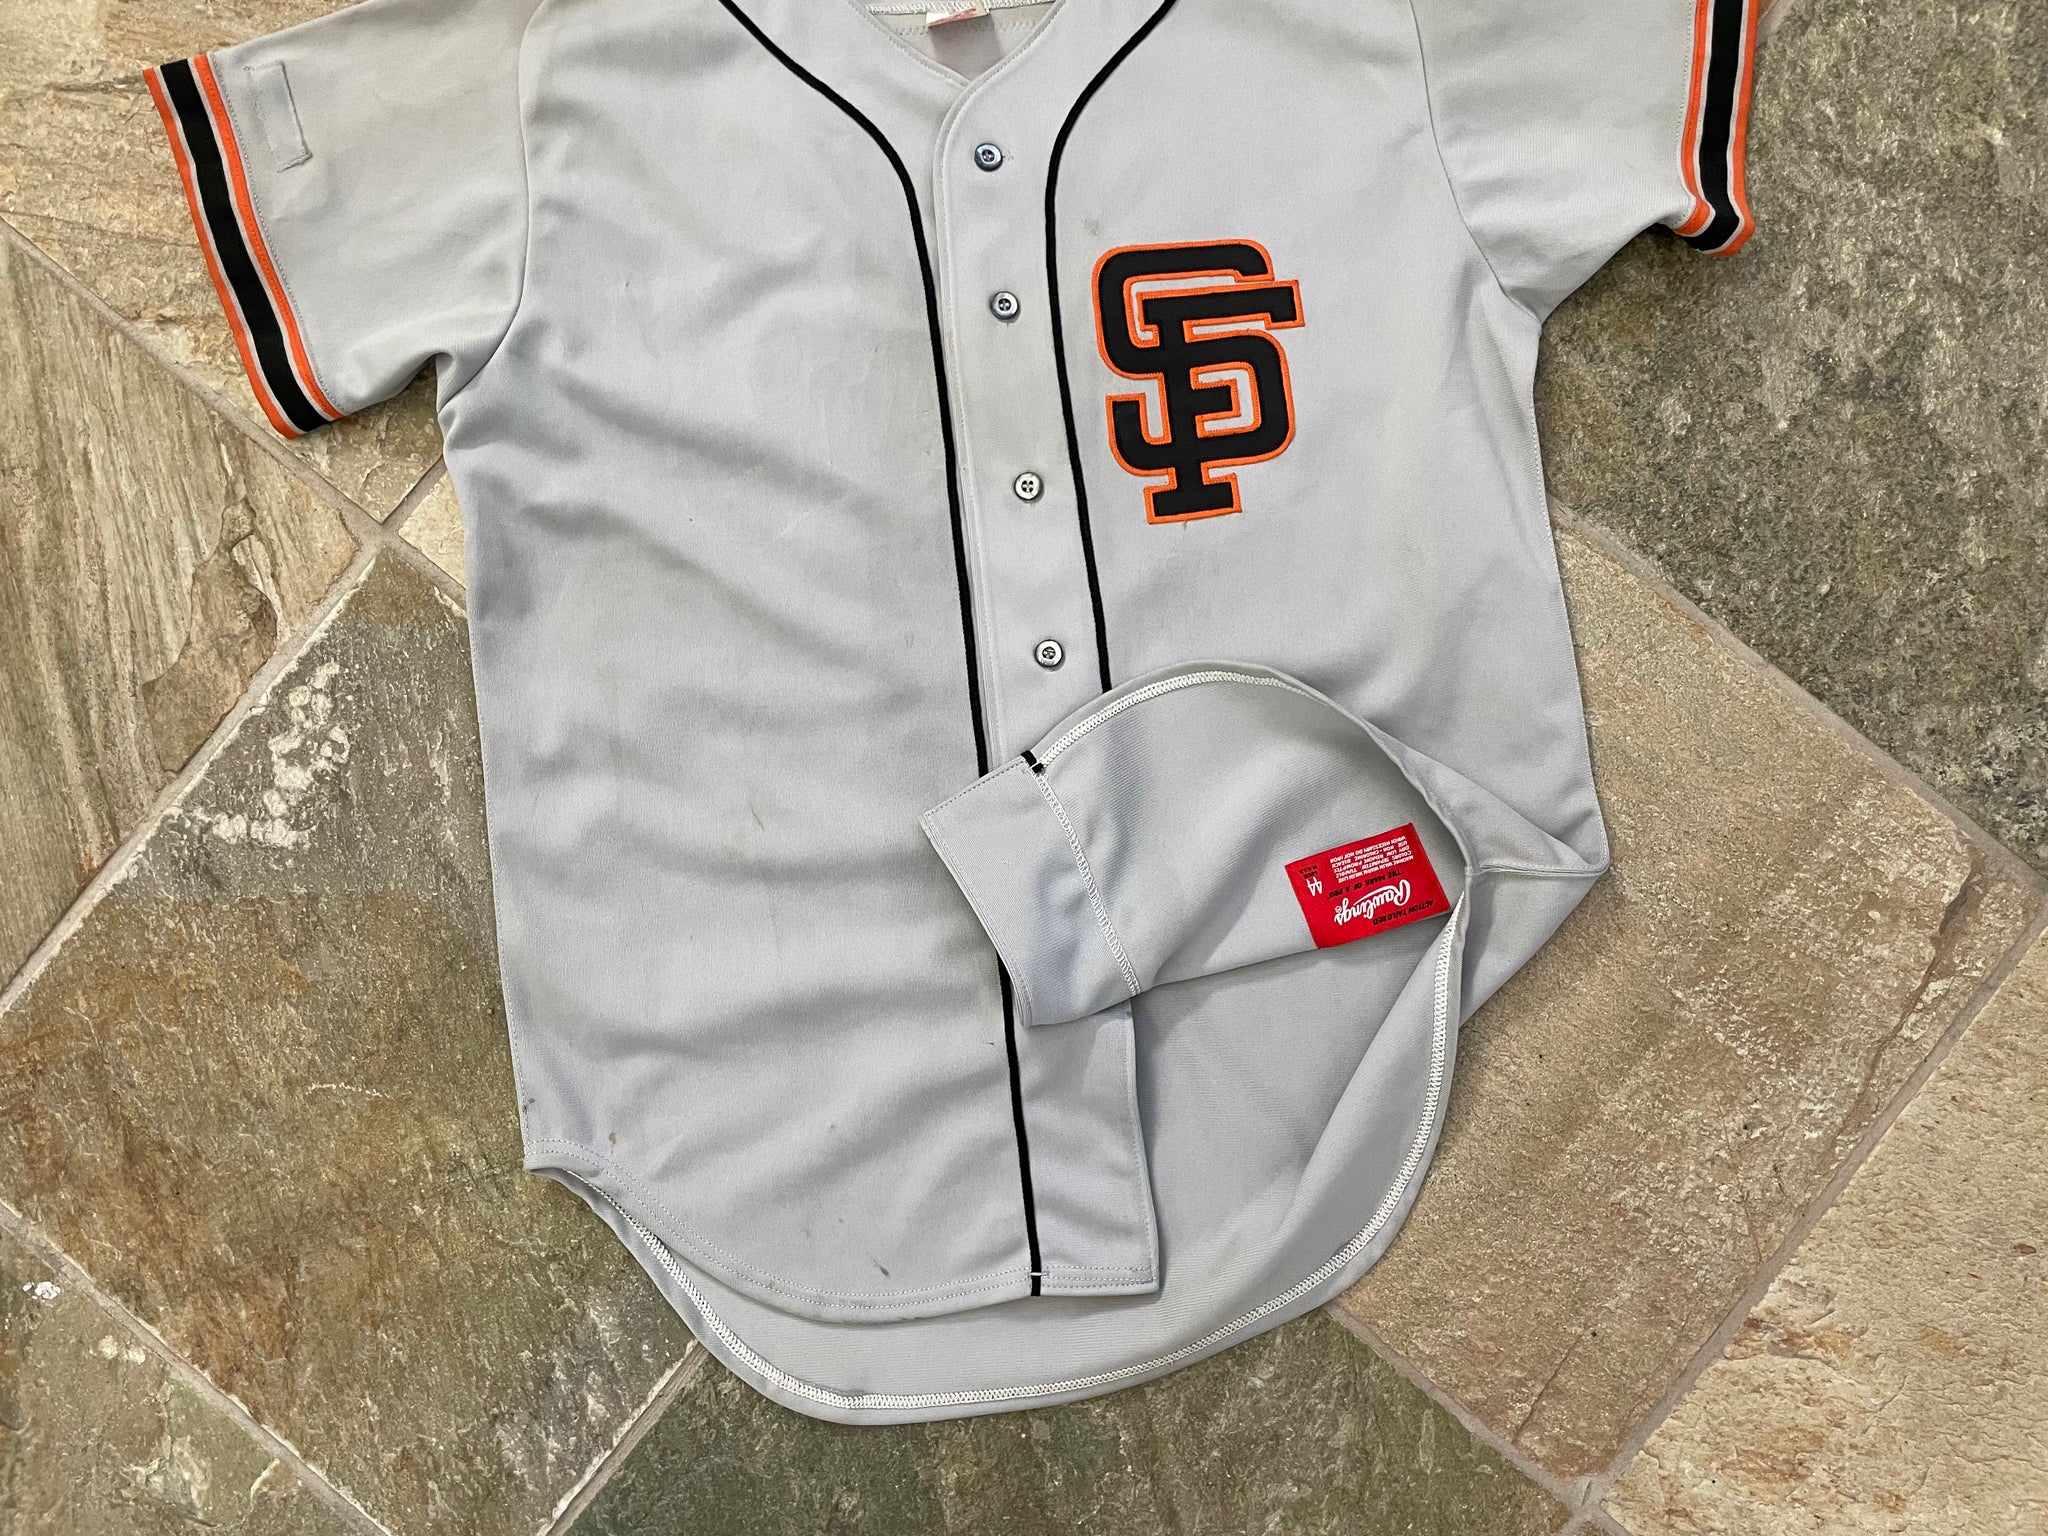 AUTHENTIC VINTAGE SF GIANTS JERSEY 46 LARGE RAWLINGS GREY BASEBALL 1980S